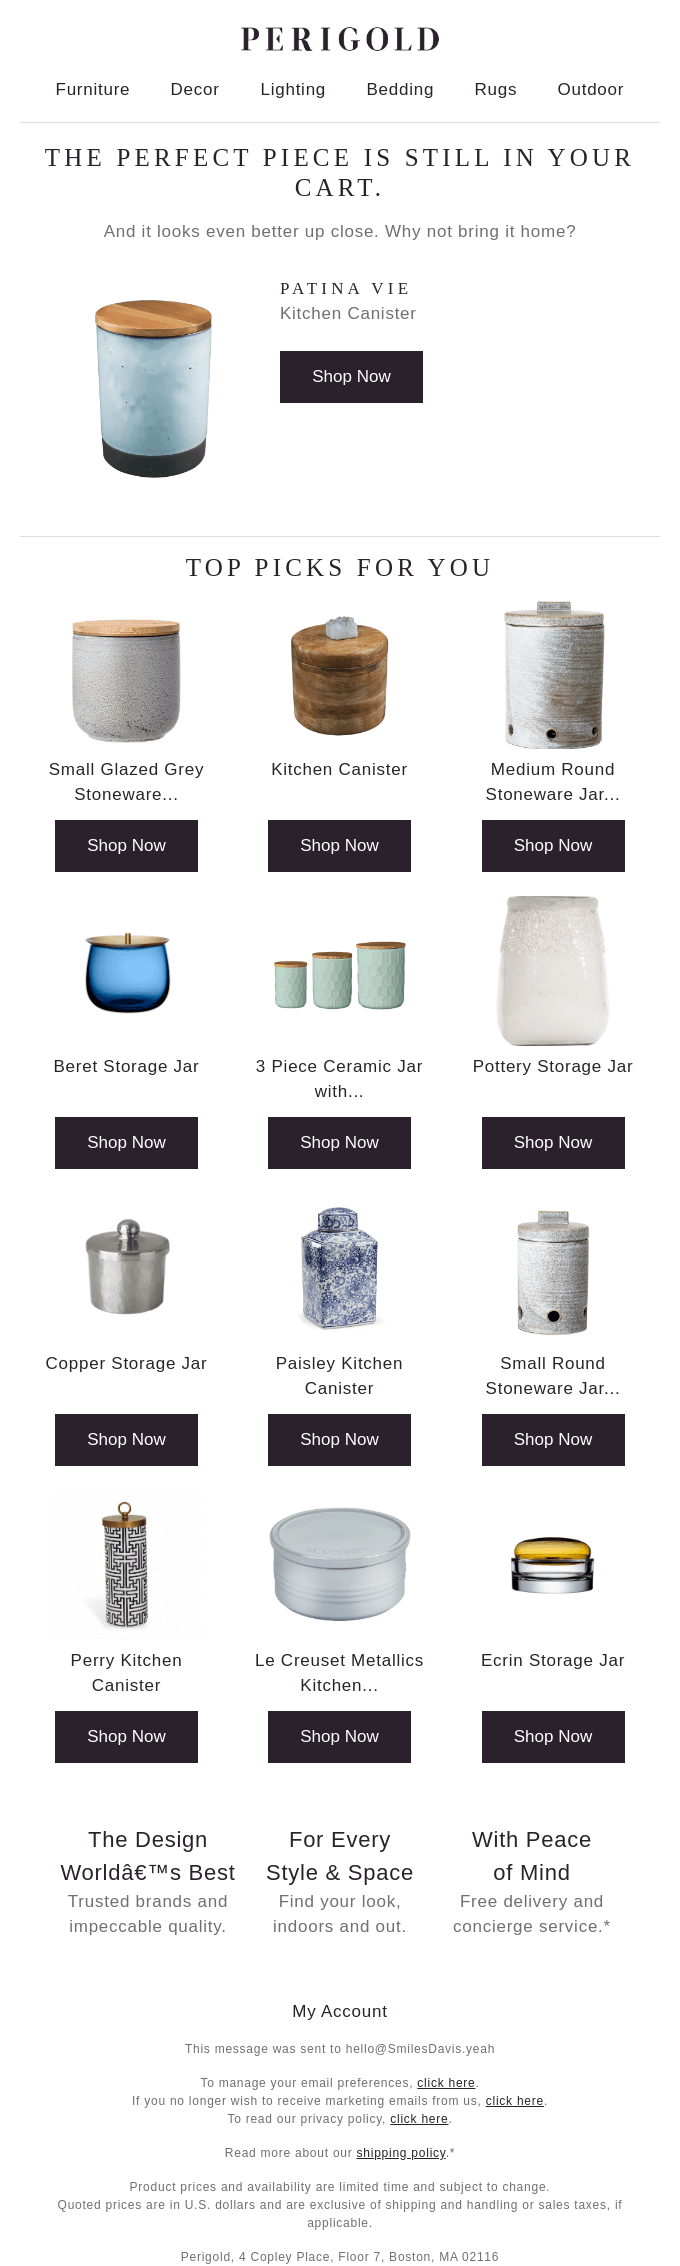 the kitchen canister is in your cart